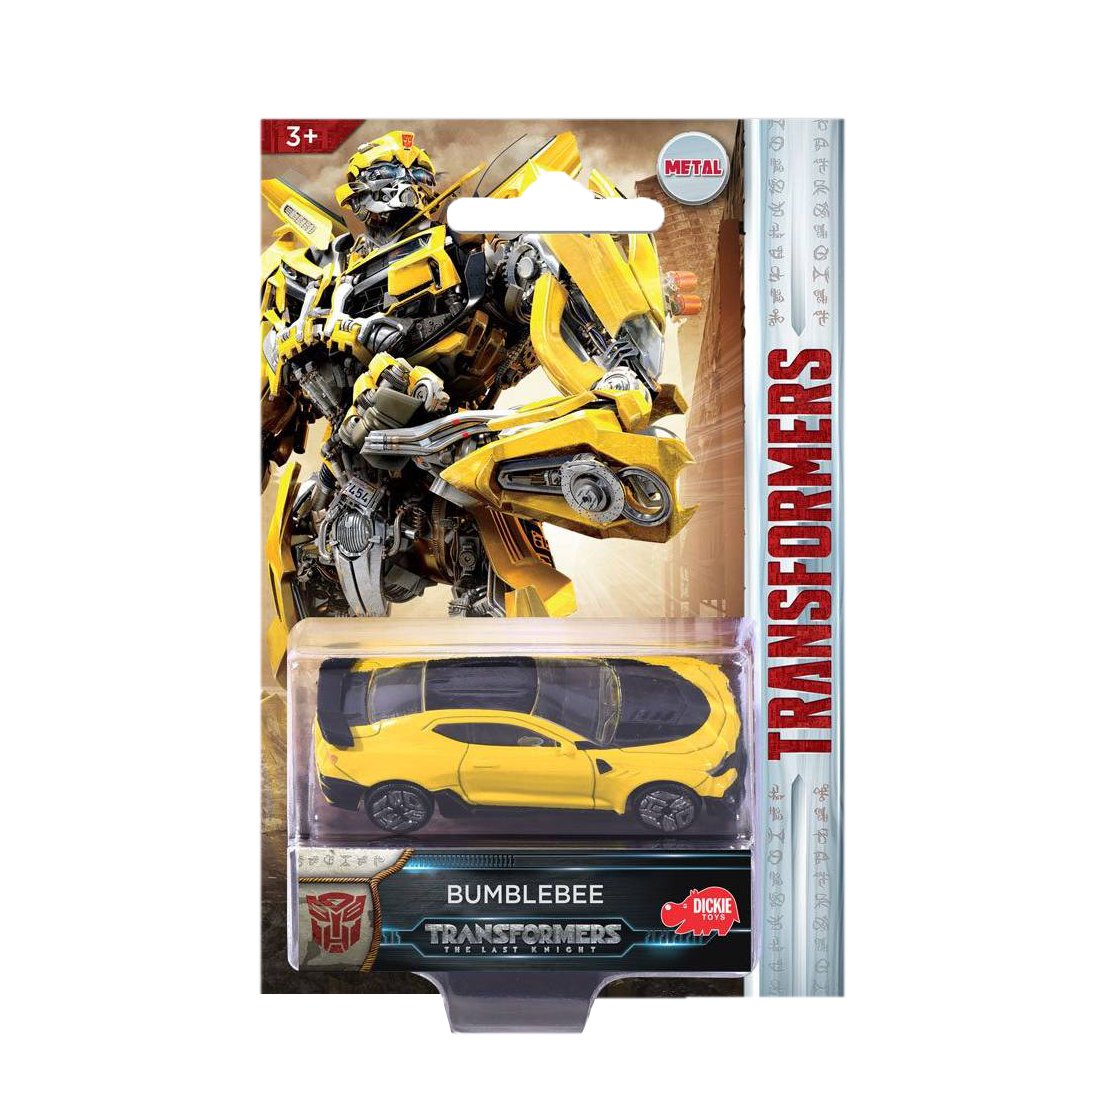 Majorette Dickie Toys Transformers M5 Mini Bumblebee Vehicle Toy Car With 203111002 R